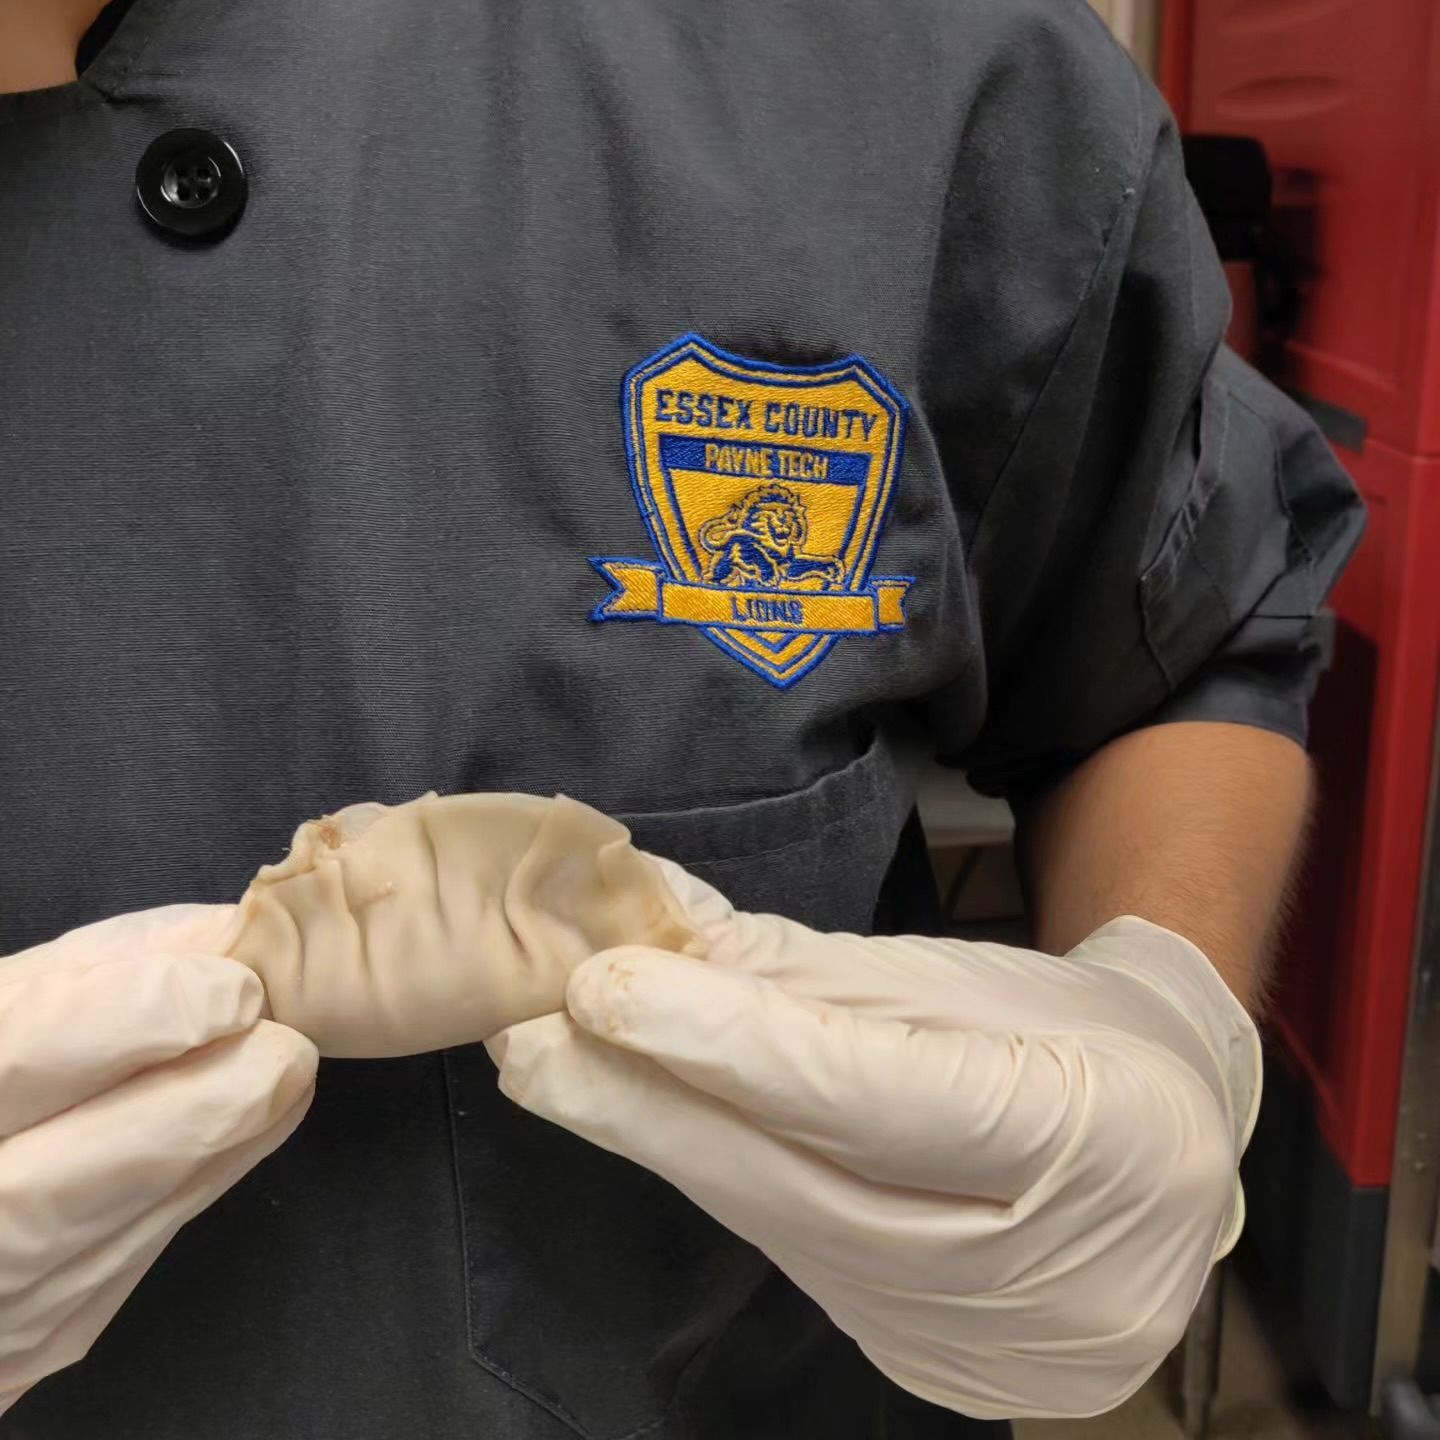 A person wearing gloves is holding a dumpling with a badge that says essex county